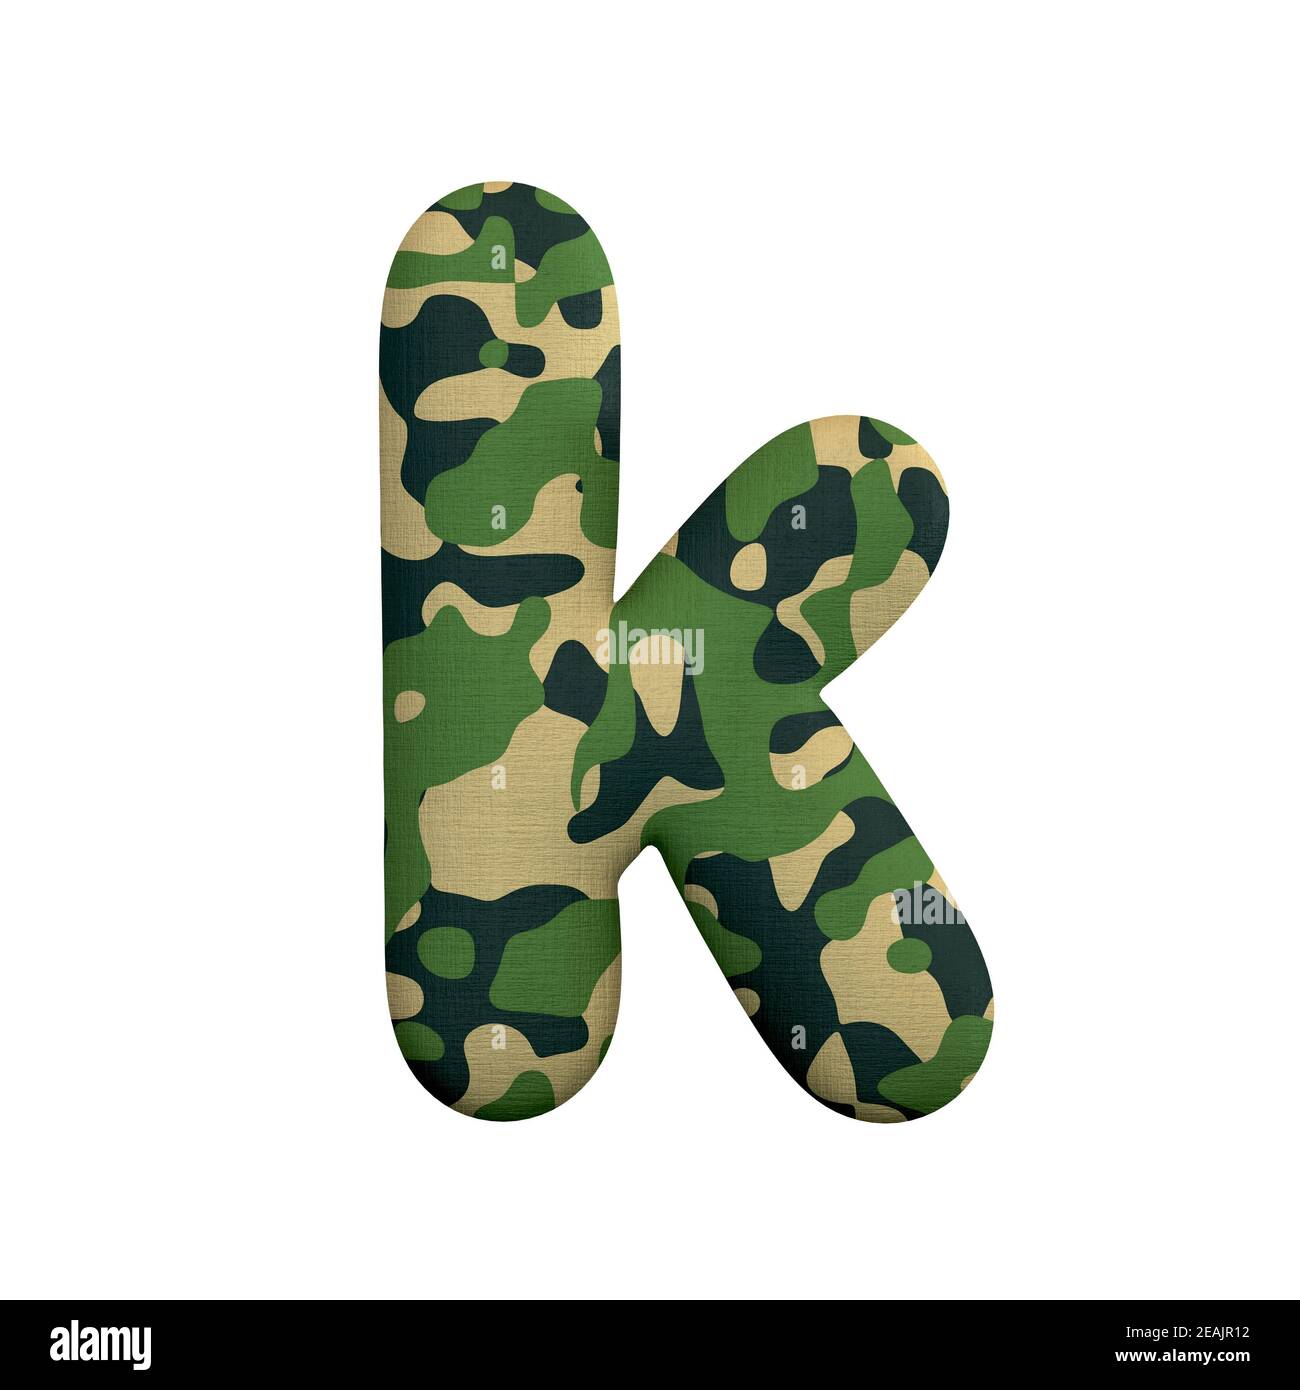 Army letter K - Small 3d Camo font - Suitable for Army, war or survivalism related subjects Stock Photo